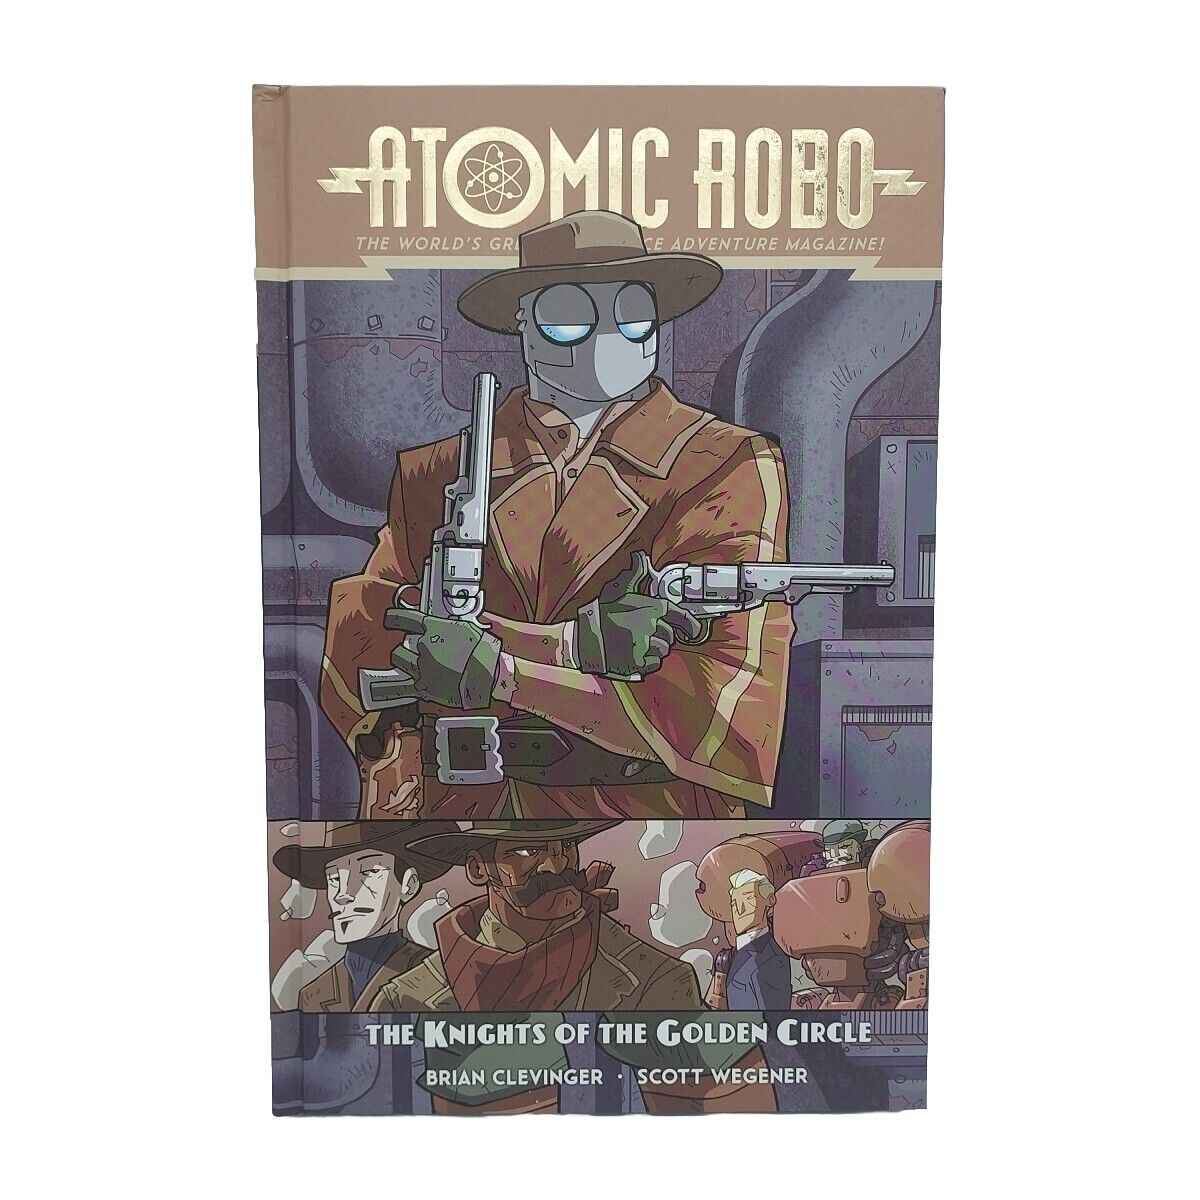 Atomic Robo: The Knights of the Golden Circle brand new hardcover volume 9